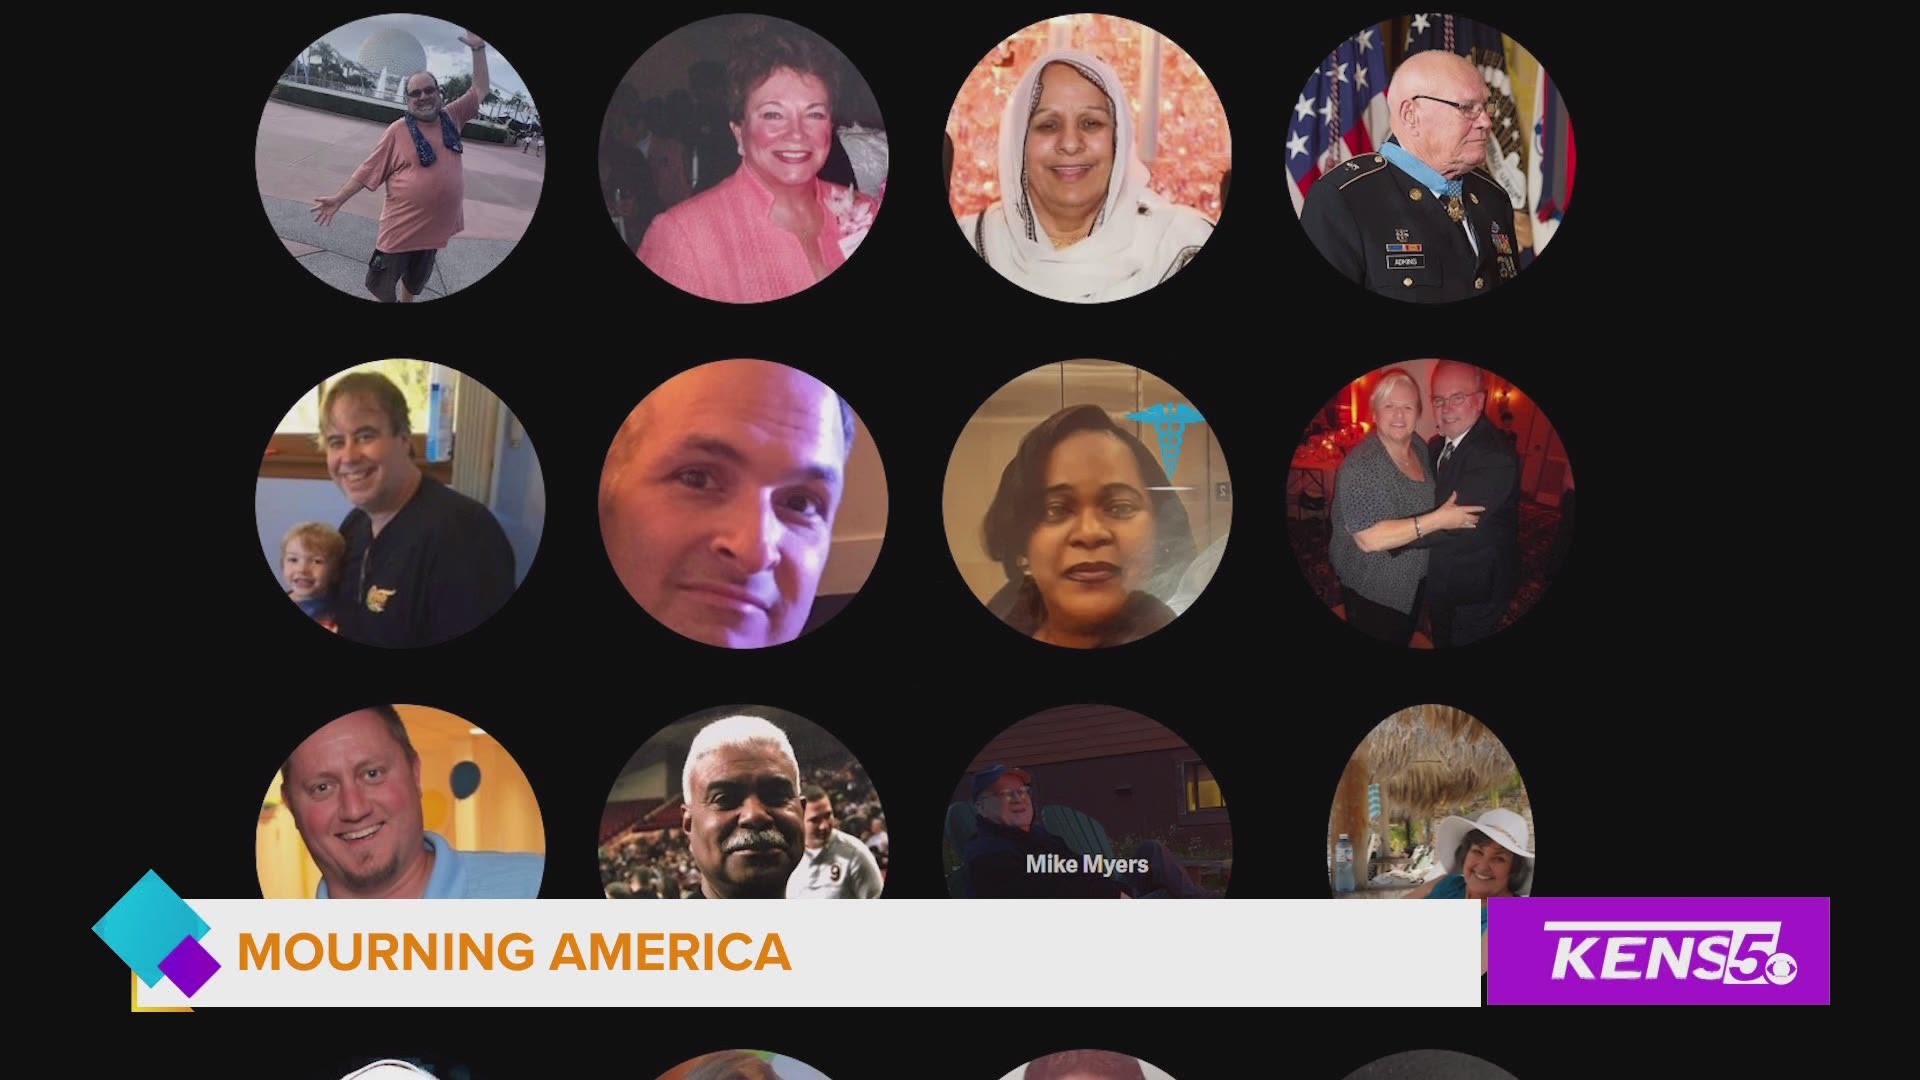 Mourning America is a Non-Profit that is helping people who have lost a loved one to the Coronavirus, keep their memories alive by sharing their stories.